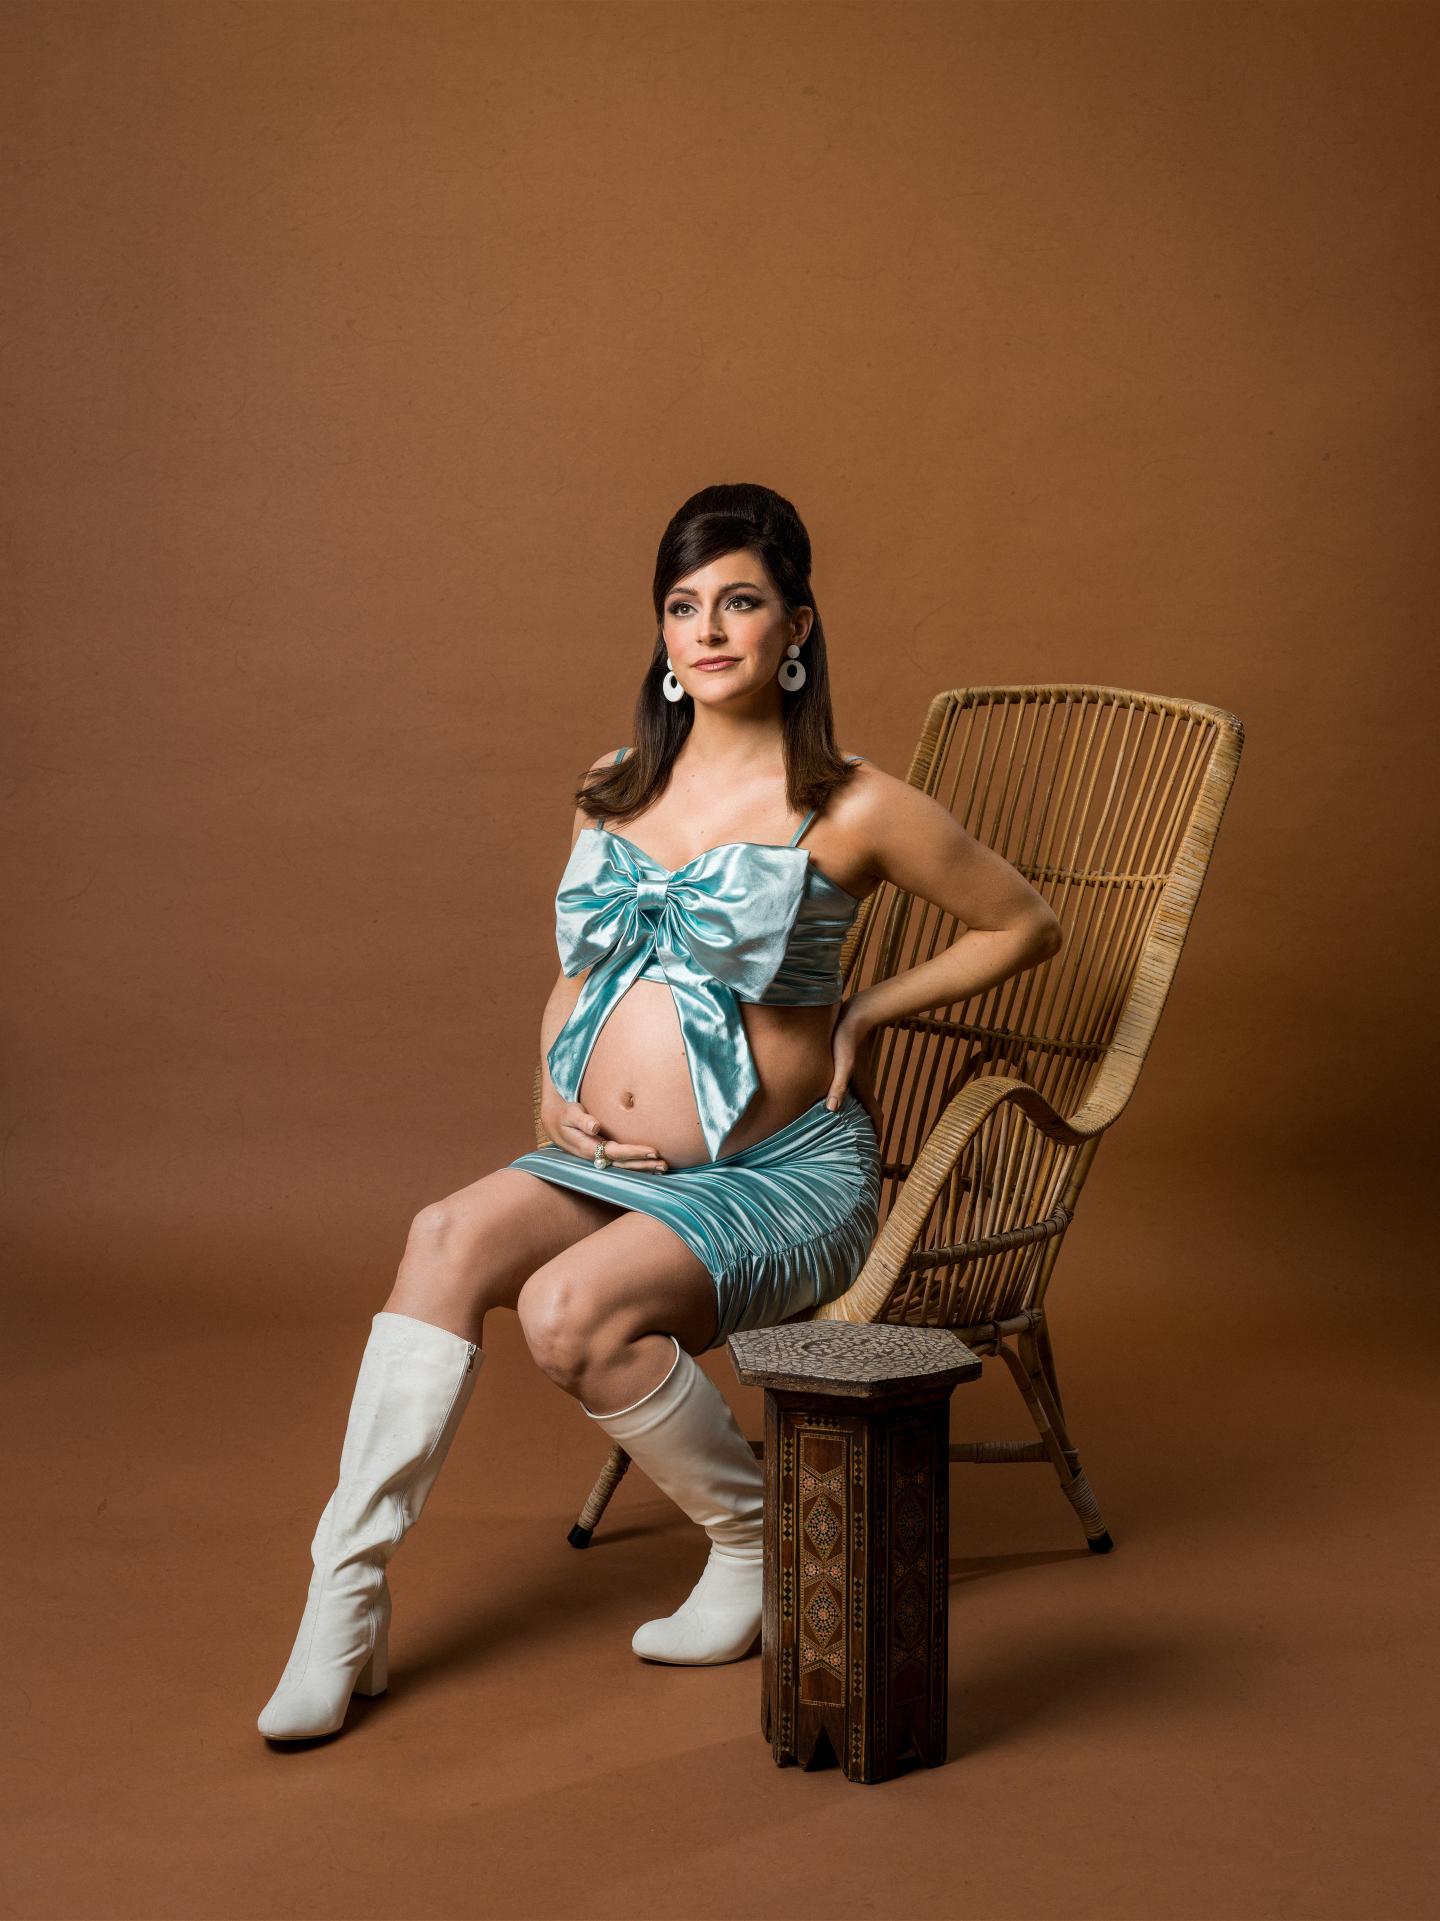 Image of Janine Harouni sitting down in front of a brown background